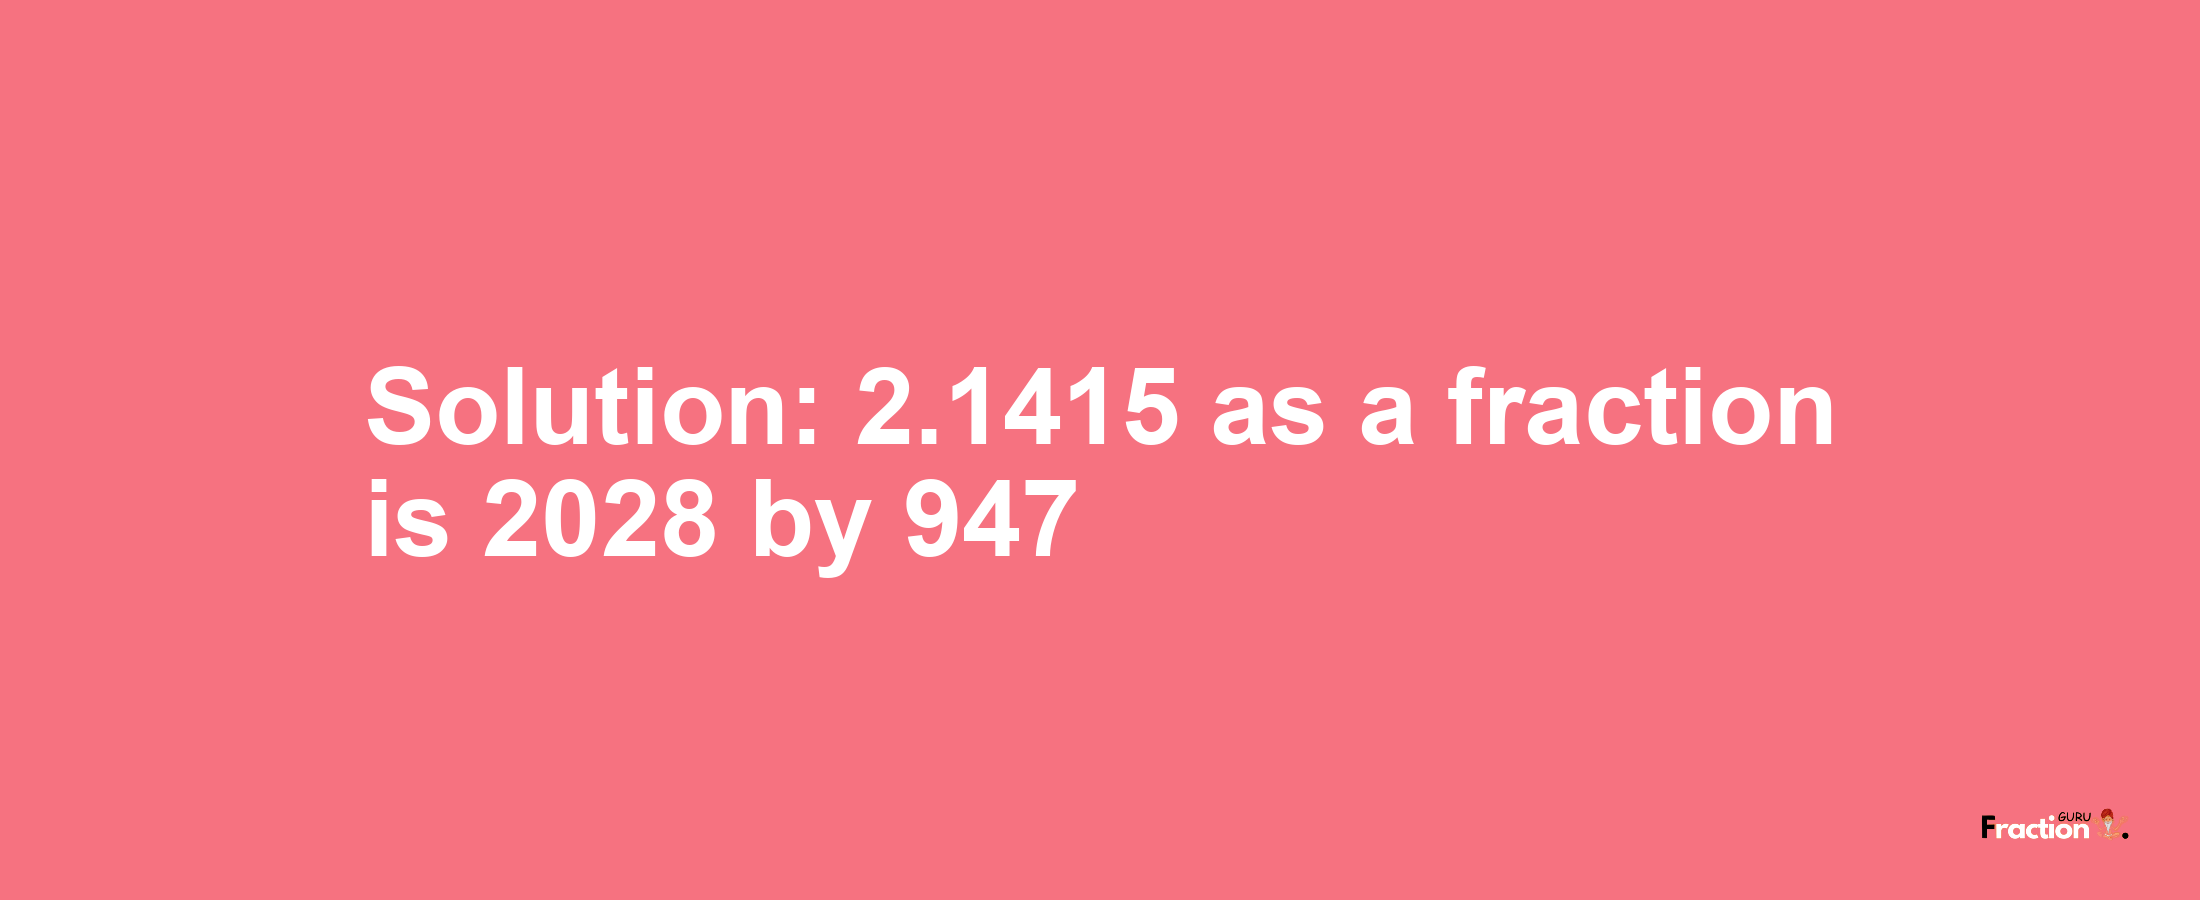 Solution:2.1415 as a fraction is 2028/947